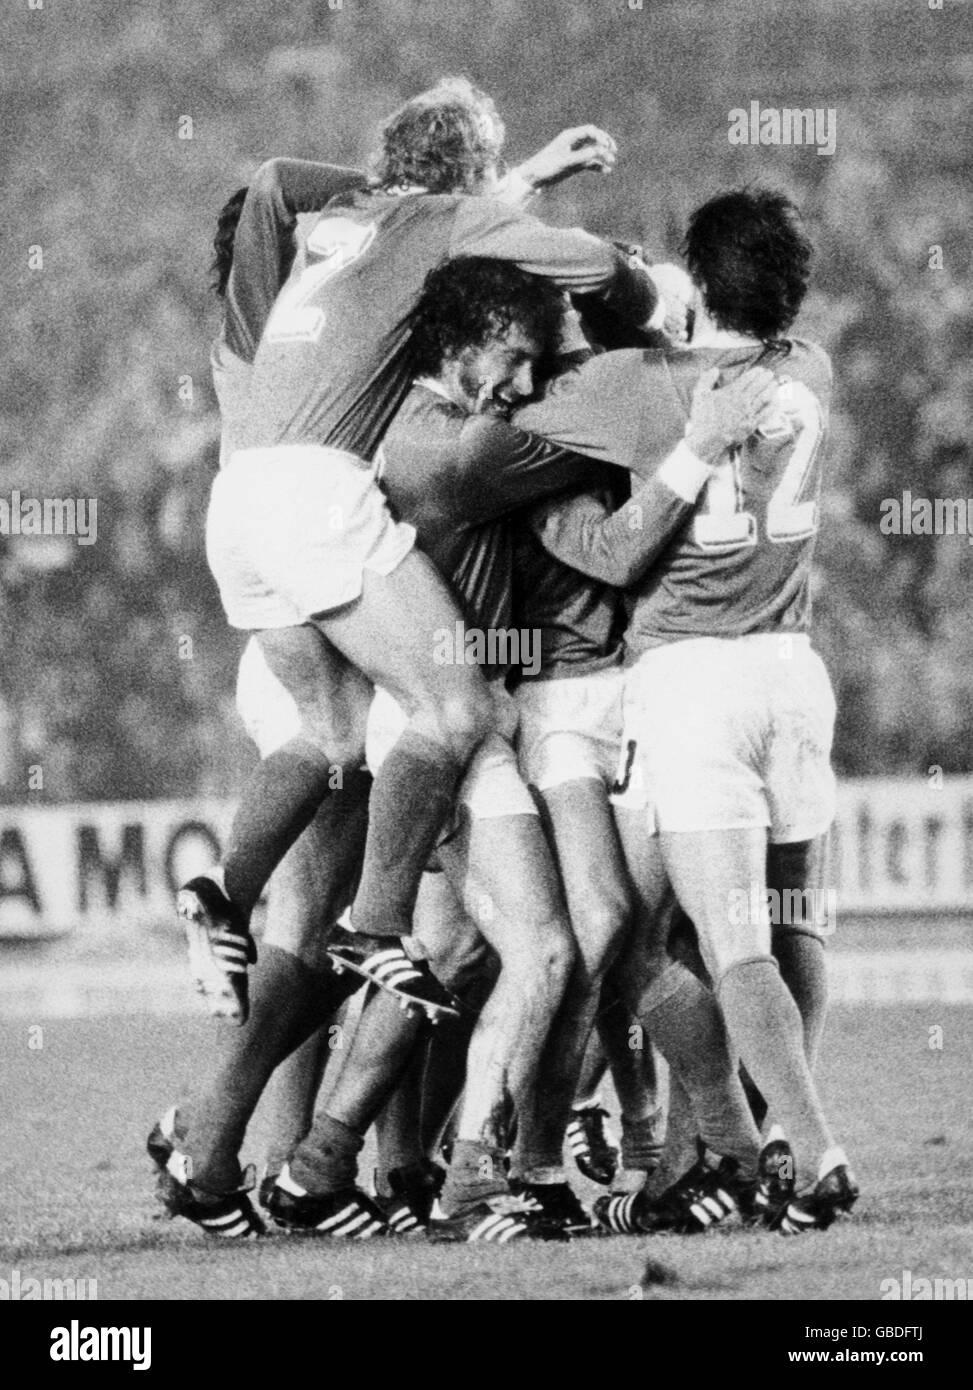 West Germany's Jurgen Grabowski is buried under a pile of teammates, including Berti Vogts (2), Paul Breitner (c) and Wolfgang Overath (12), after scoring his team's third goal in a 4-2 win Stock Photo